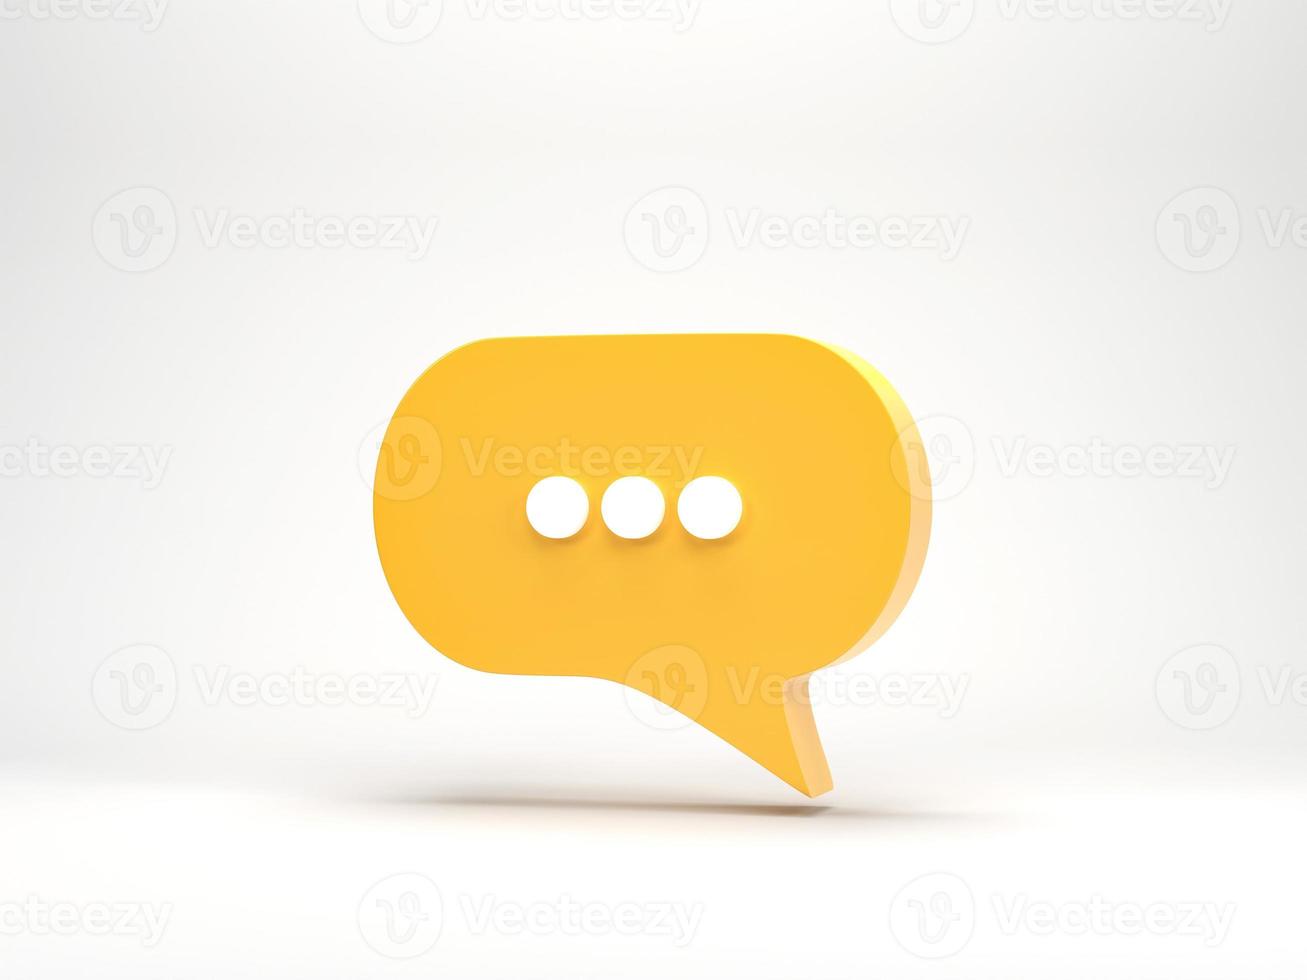 3D rendering, 3D illustration. Chat bubble icon isolated on white background. Minimal yellow chat typing. Design element for social media, messages or comment. photo